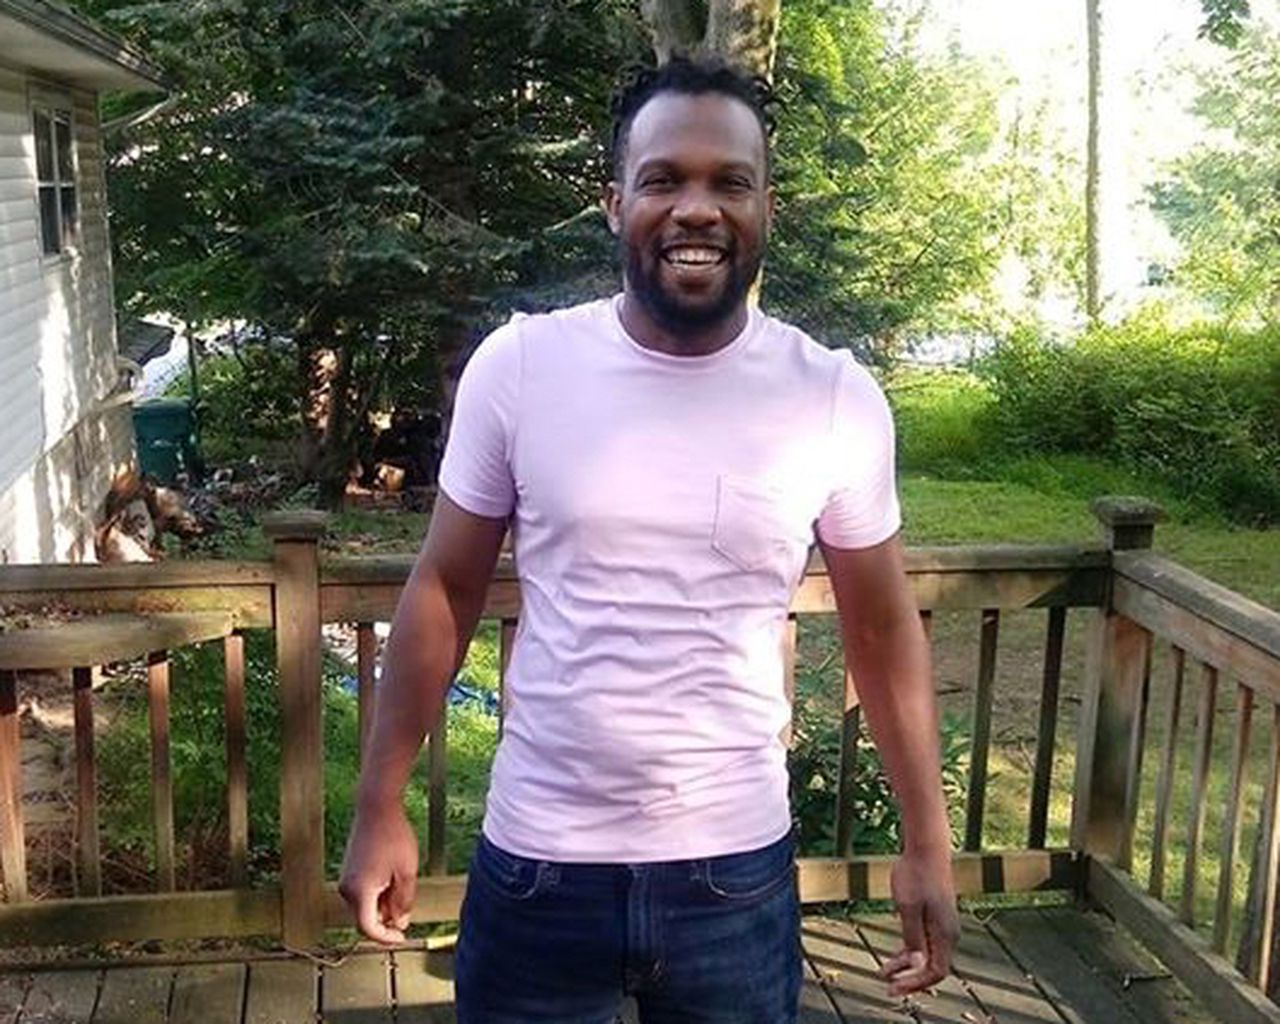 Family demands answers after unarmed black man killed by N.J. trooper, attorney says